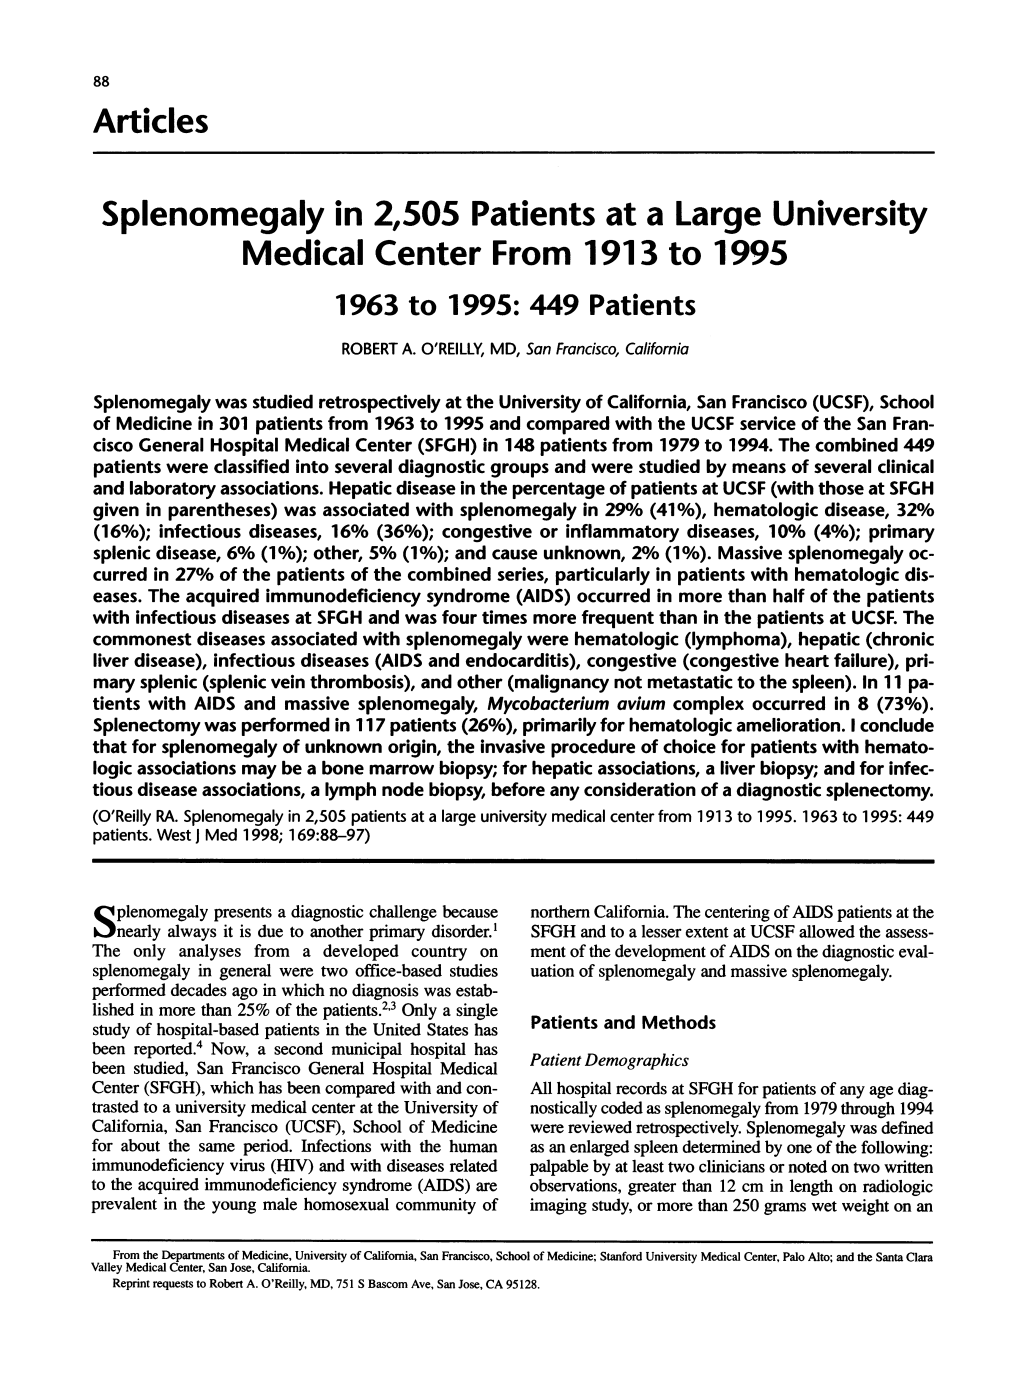 Splenomegaly in 2,505 Patients at a Large University Medical Center from 1913 to 1995 1963 to 1995: 449 Patients ROBERT A